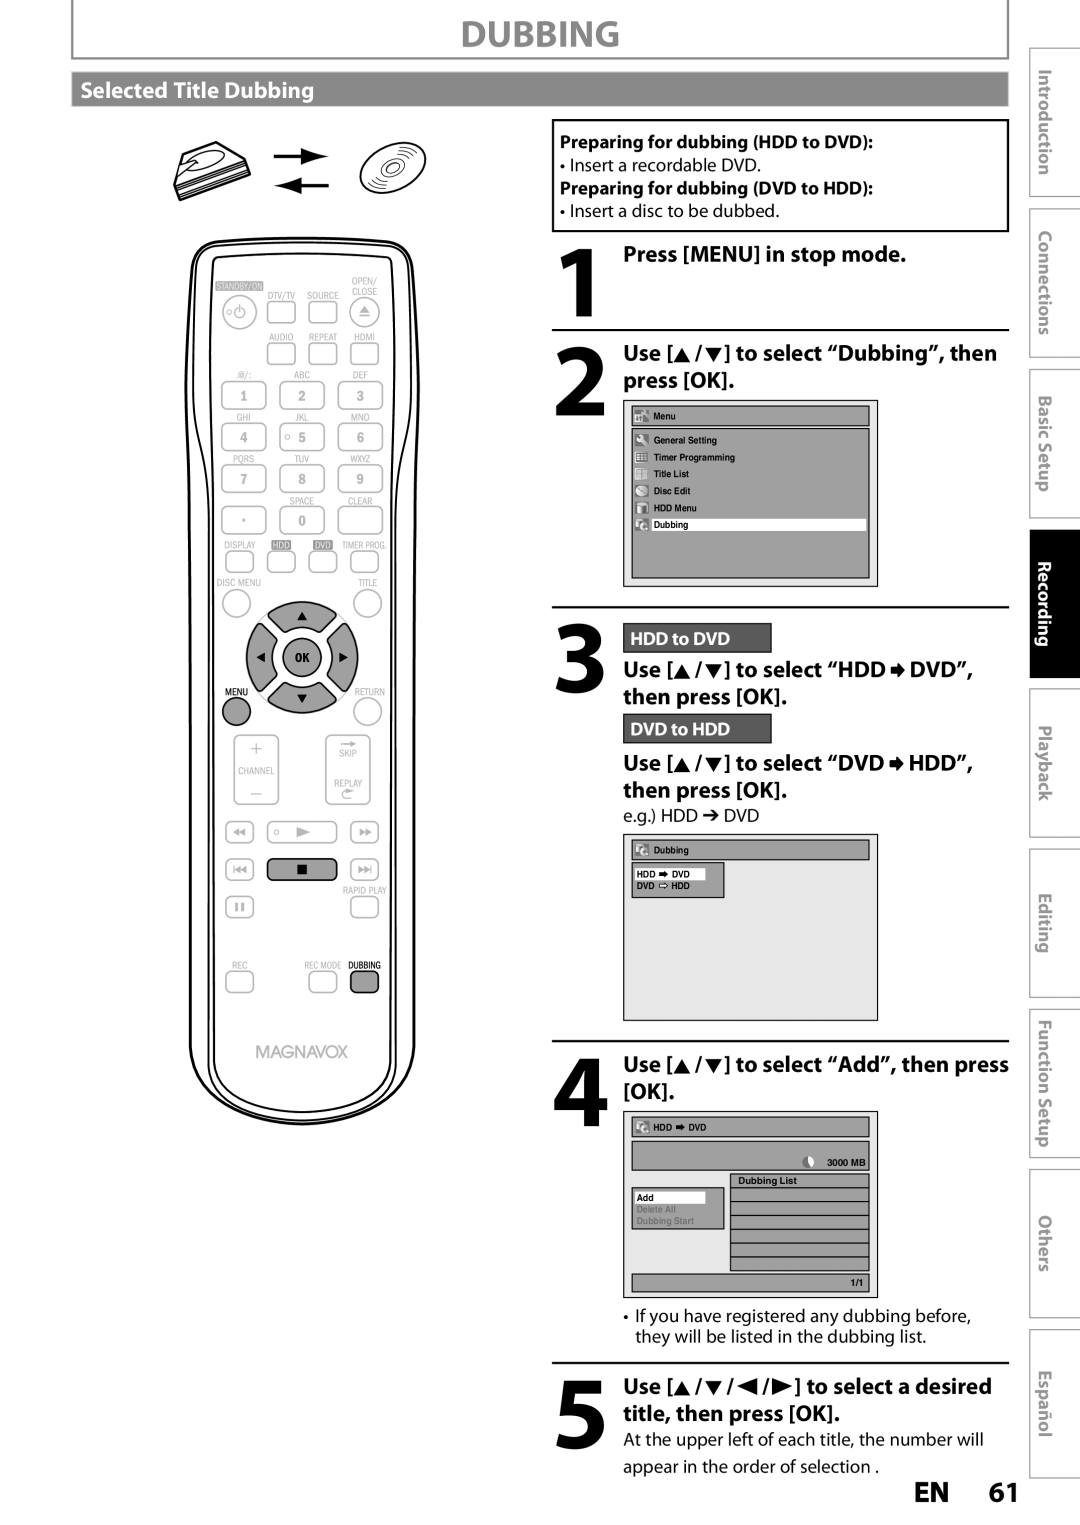 Magnavox MDR535H Selected Title Dubbing, Press MENU in stop mode, Use K / L to select “Dubbing”, then press OK, HDD to DVD 